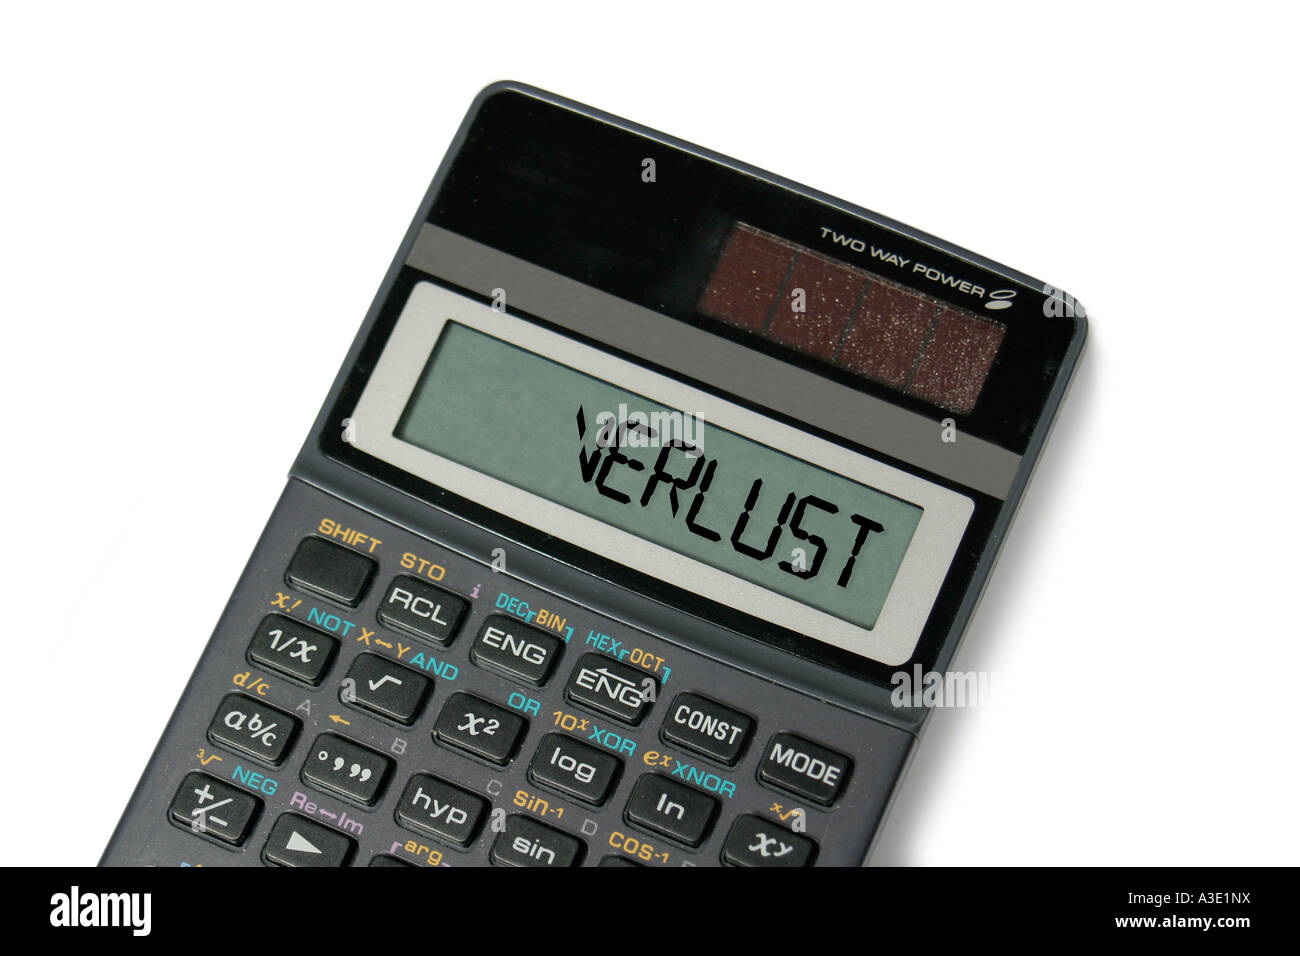 'Verlust' written in the Display of a calculator Stock Photo